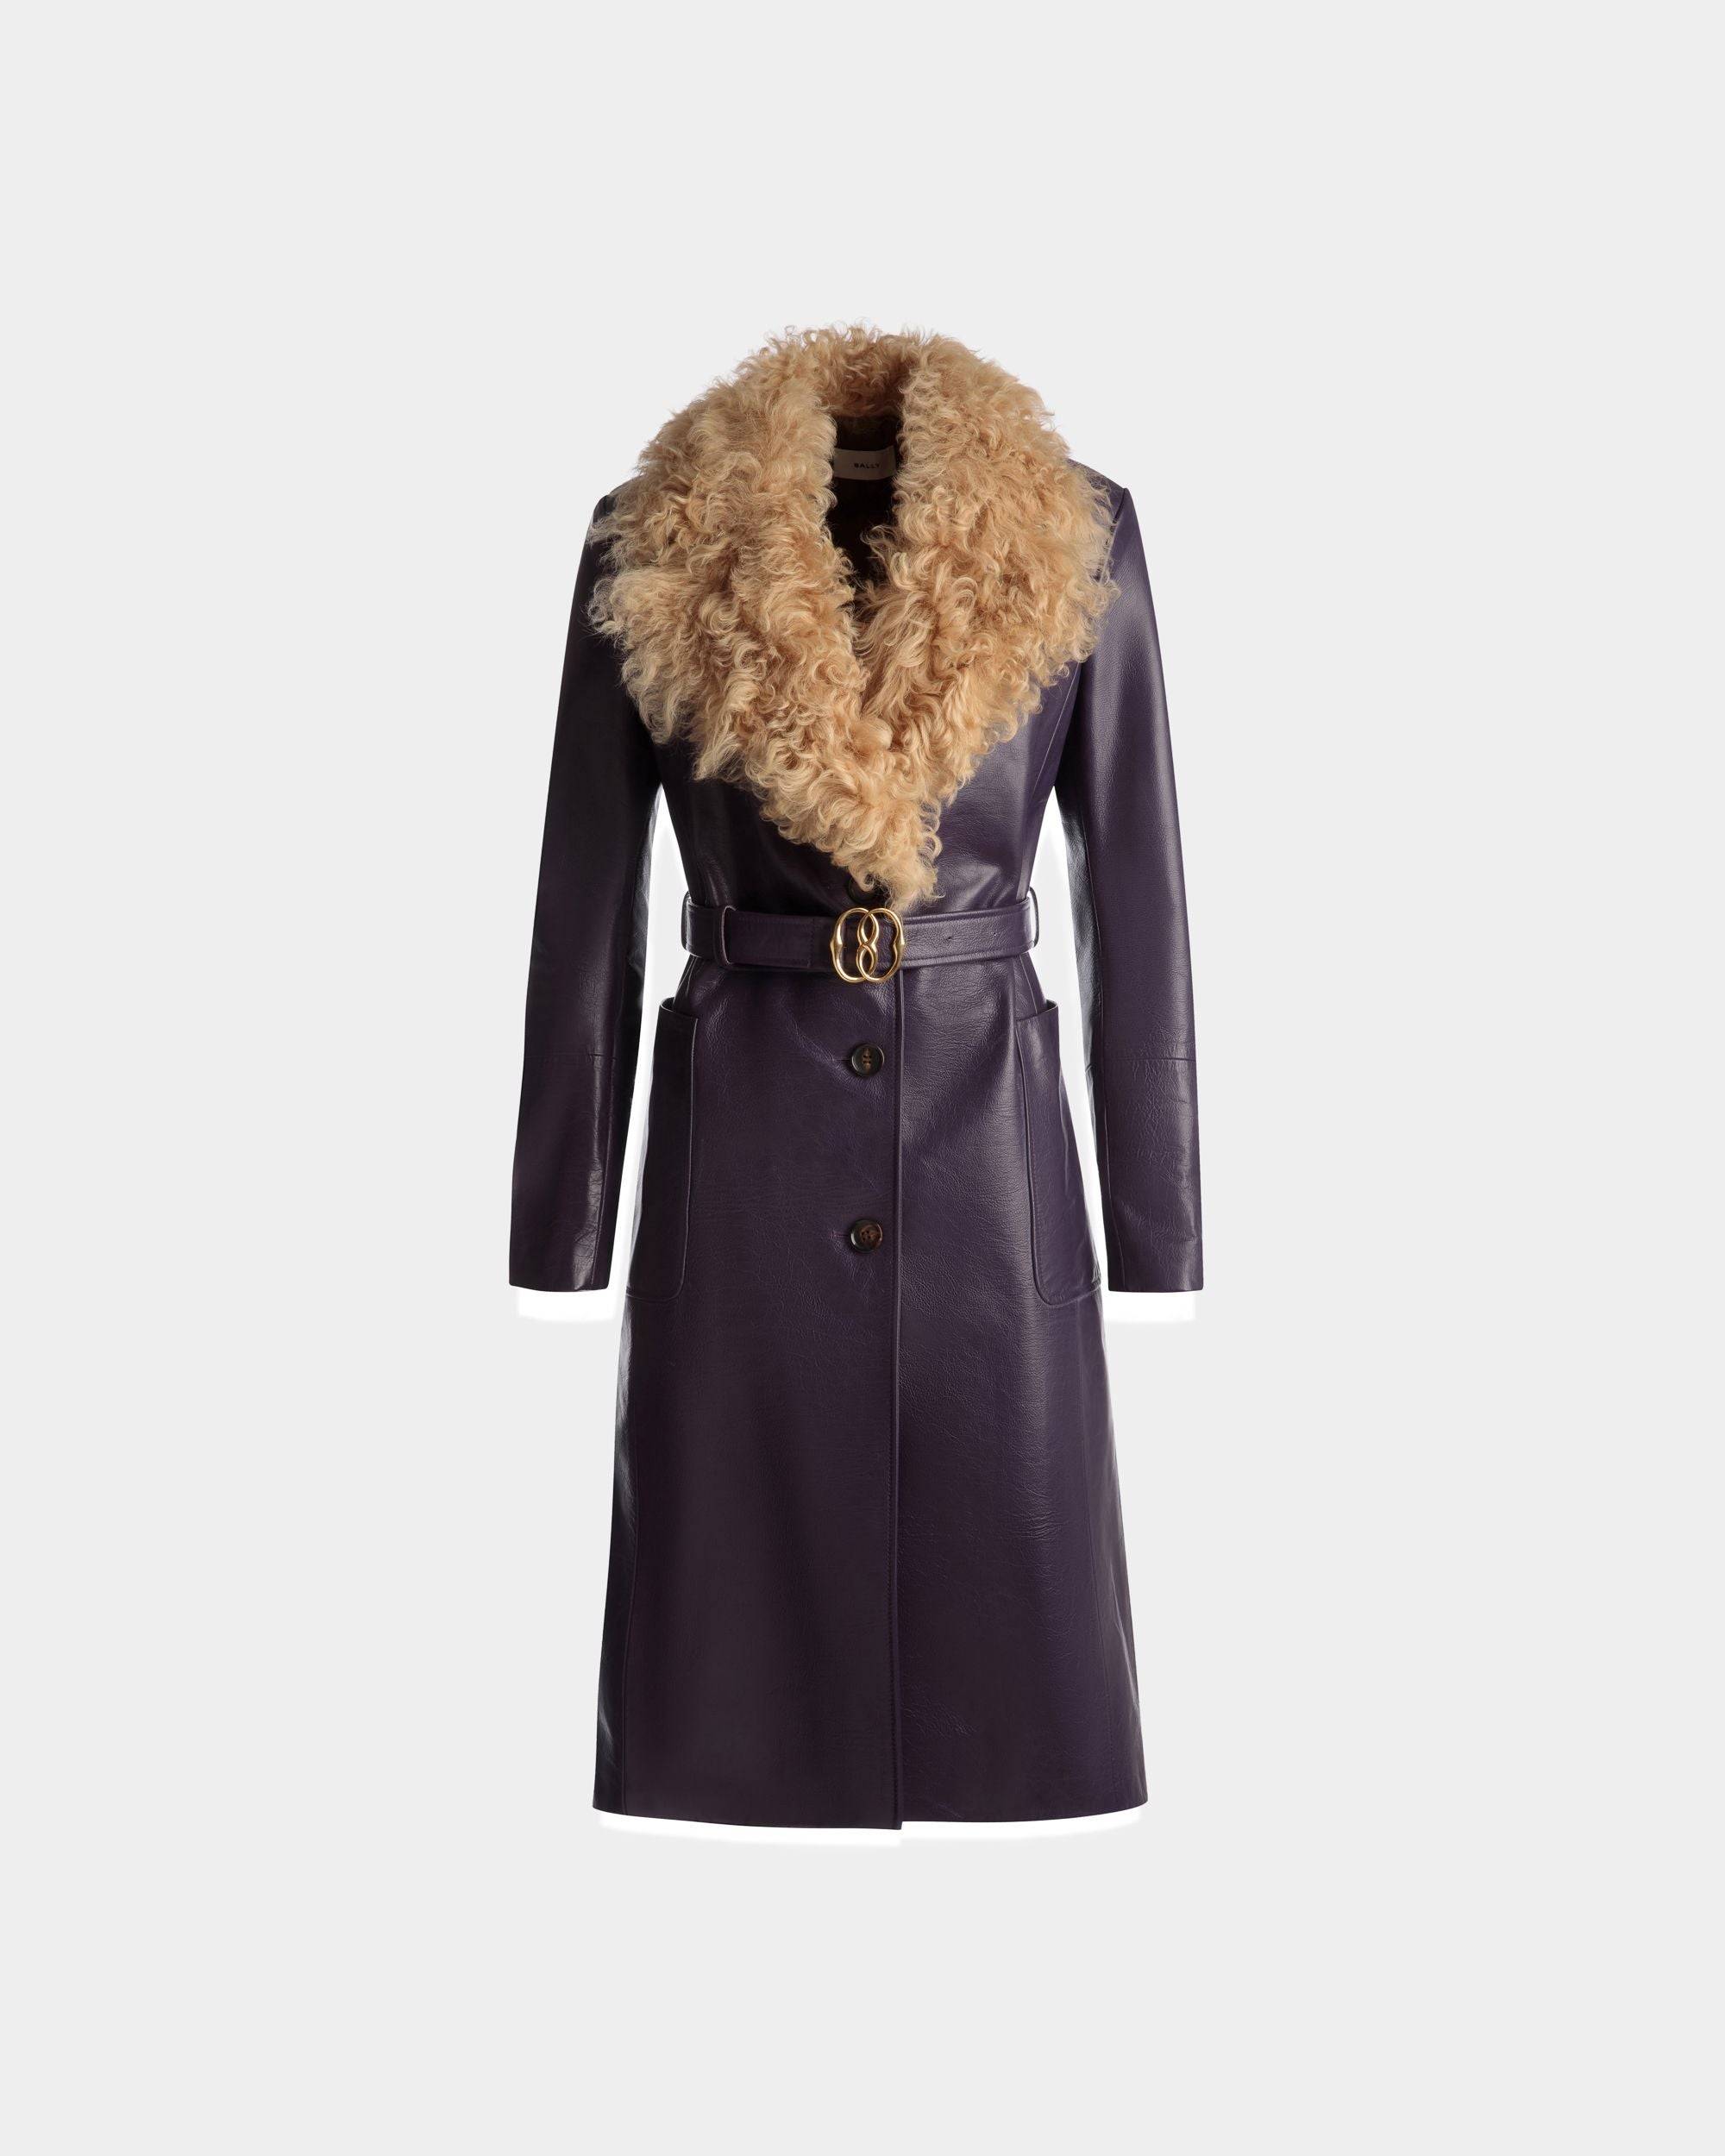 Women's Fur Collar Coat In Orchid Leather | Bally | Still Life Front